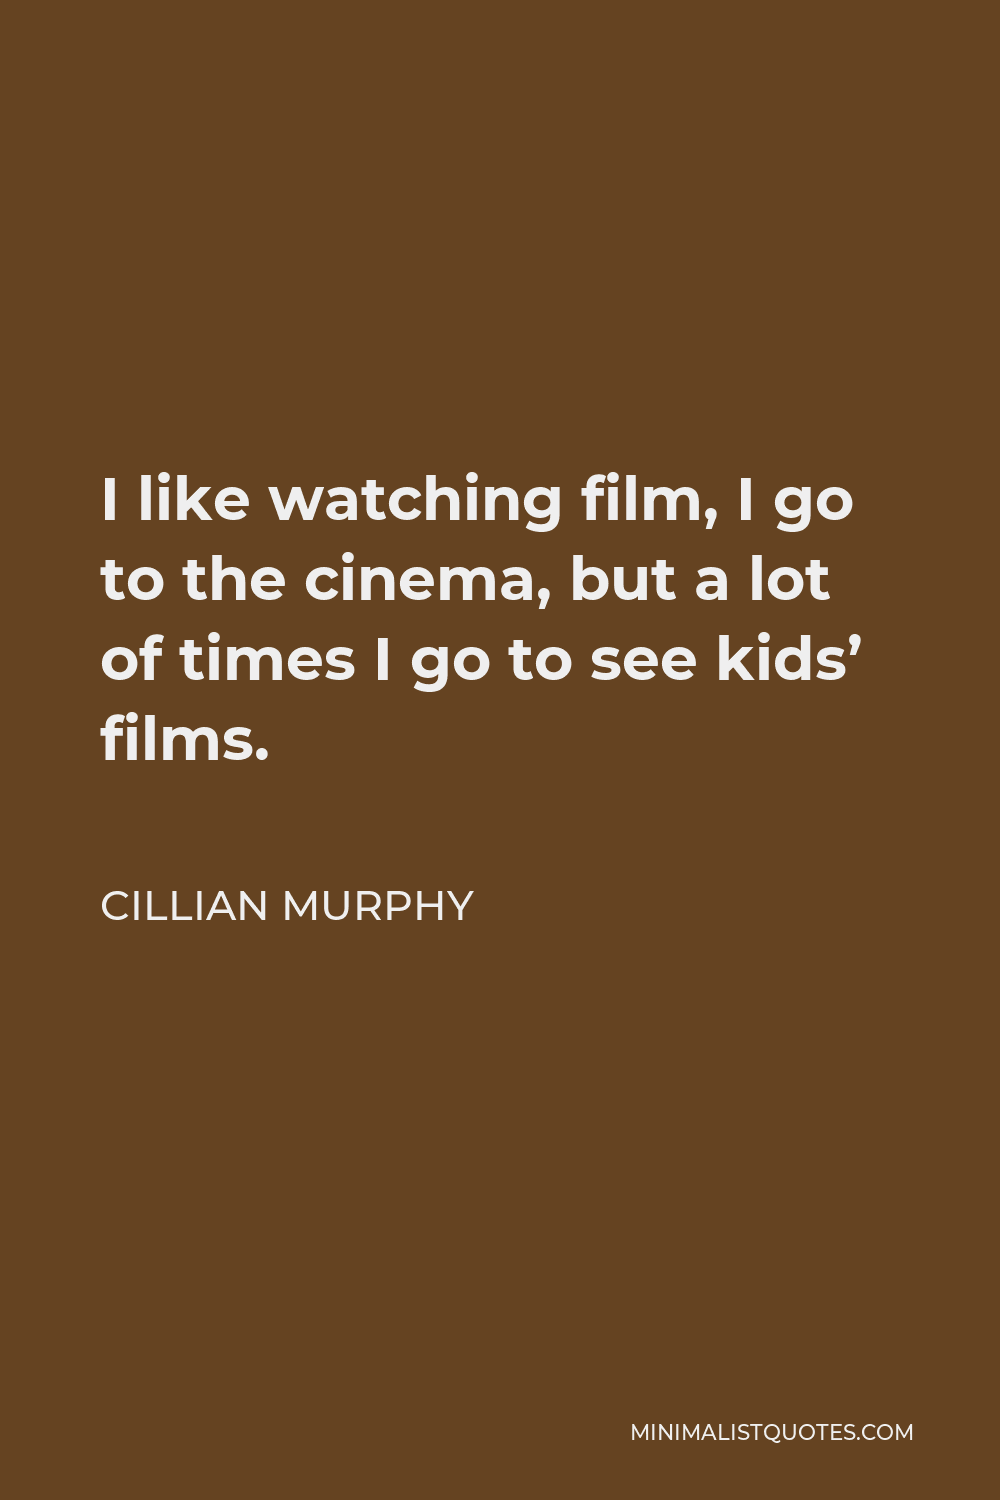 Cillian Murphy Quote - I like watching film, I go to the cinema, but a lot of times I go to see kids’ films.